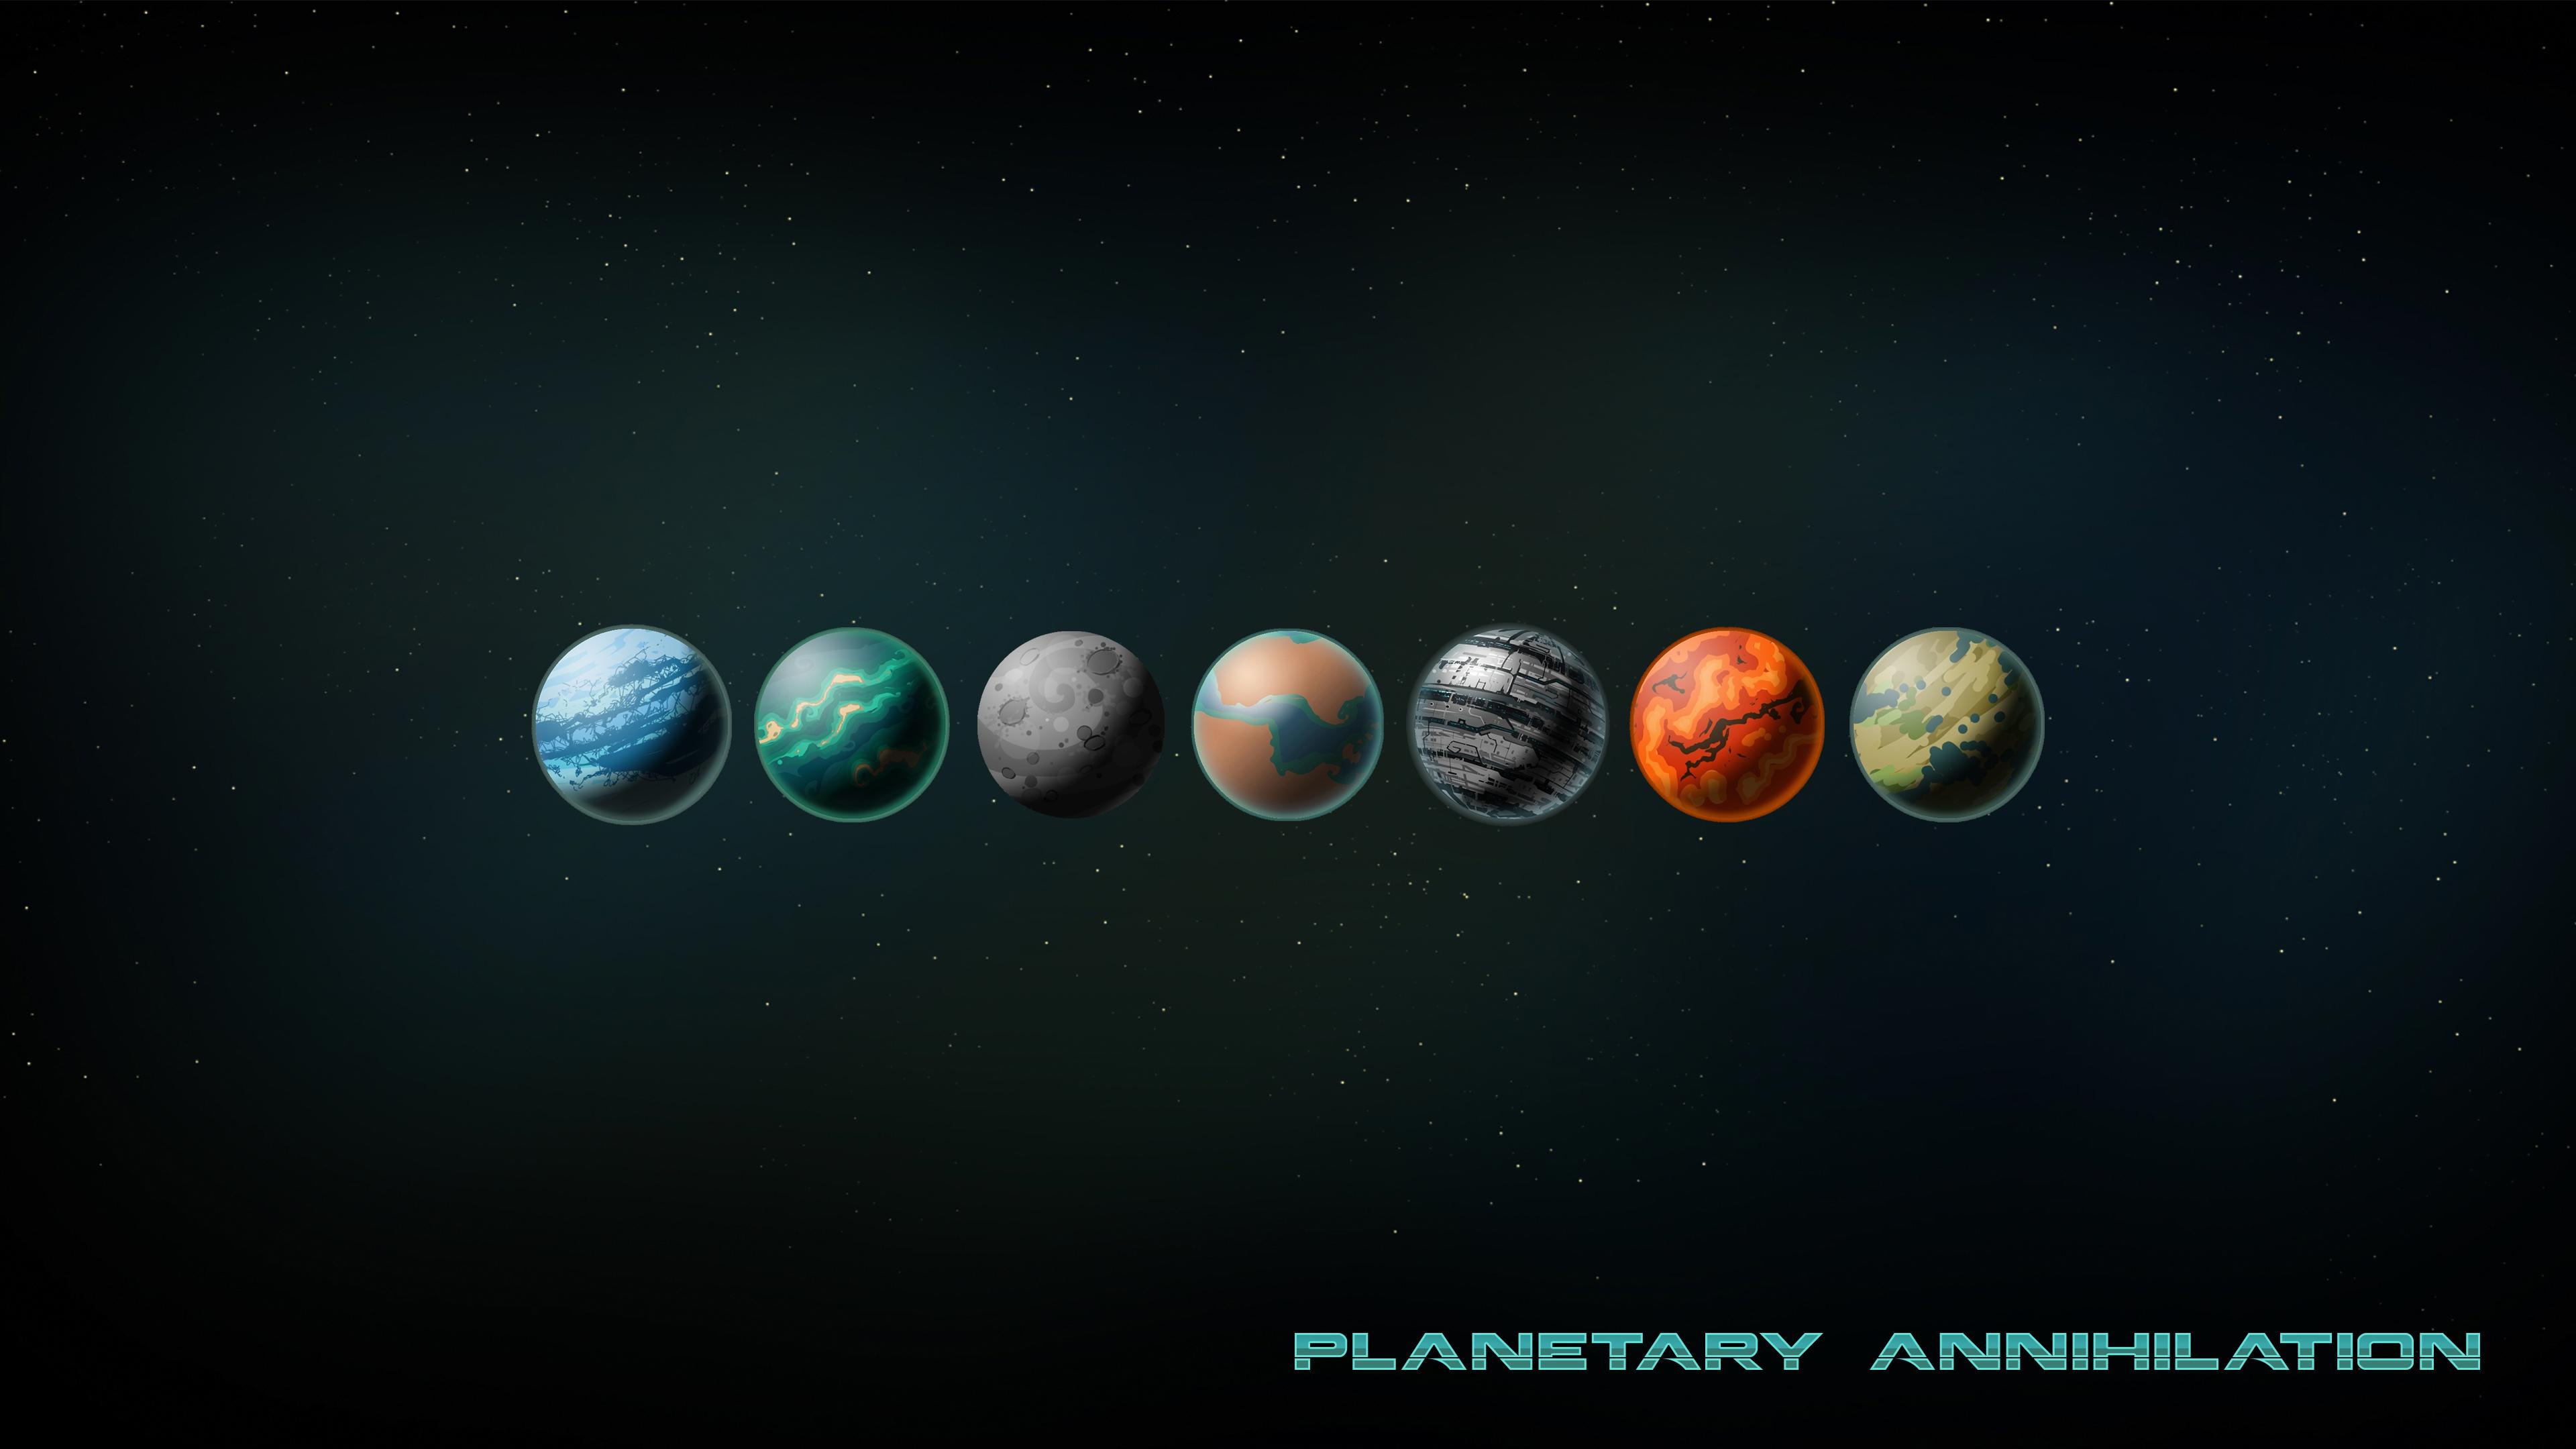 Planets Wallpaper. Planetary Annihilation Gallery